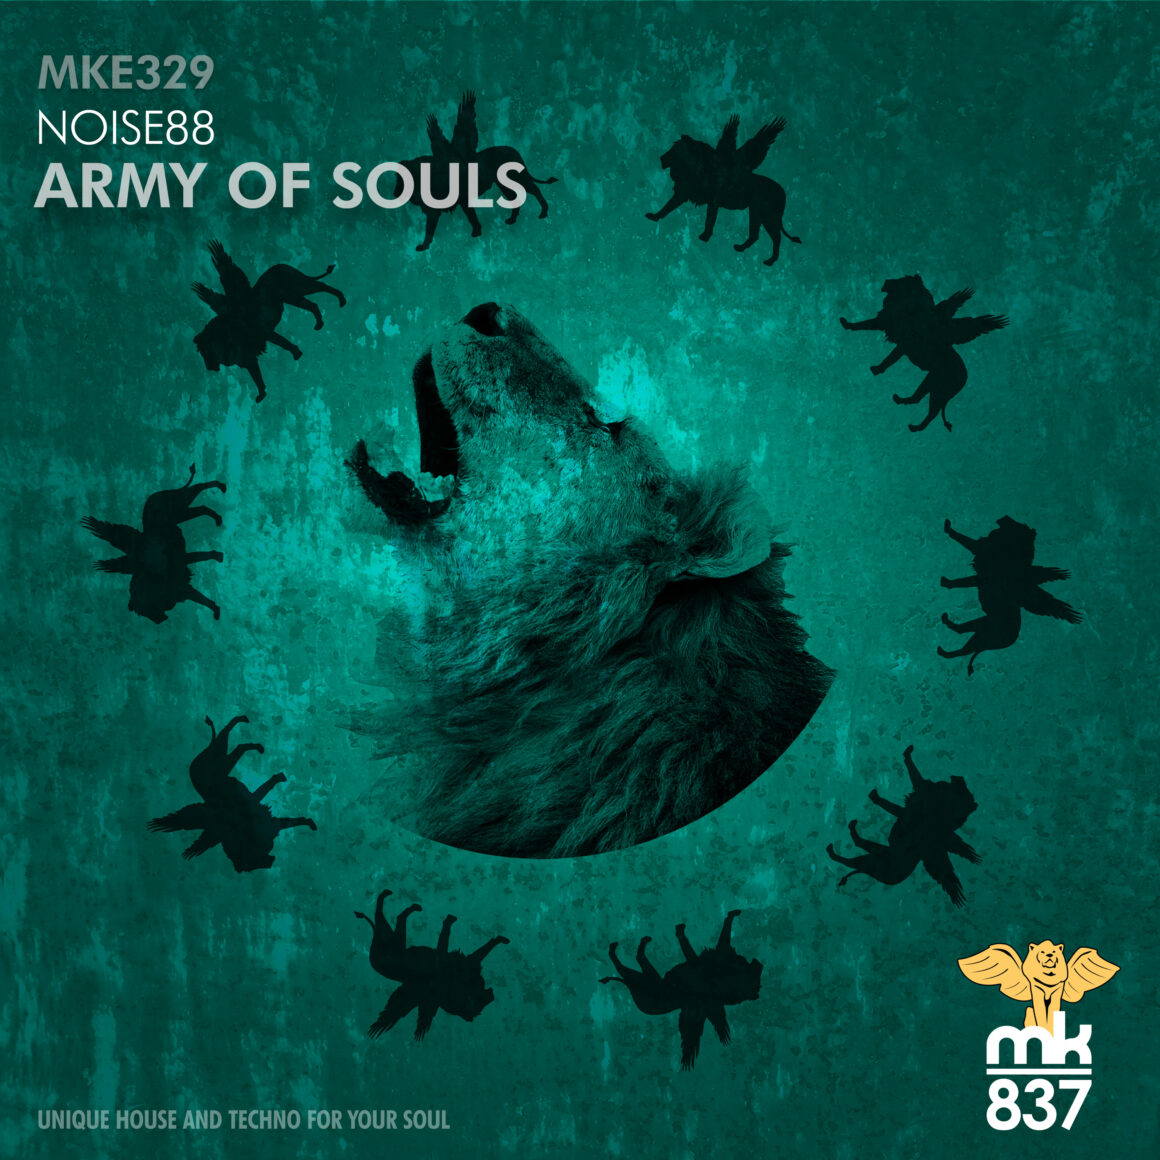 Noise88 - Army of Souls